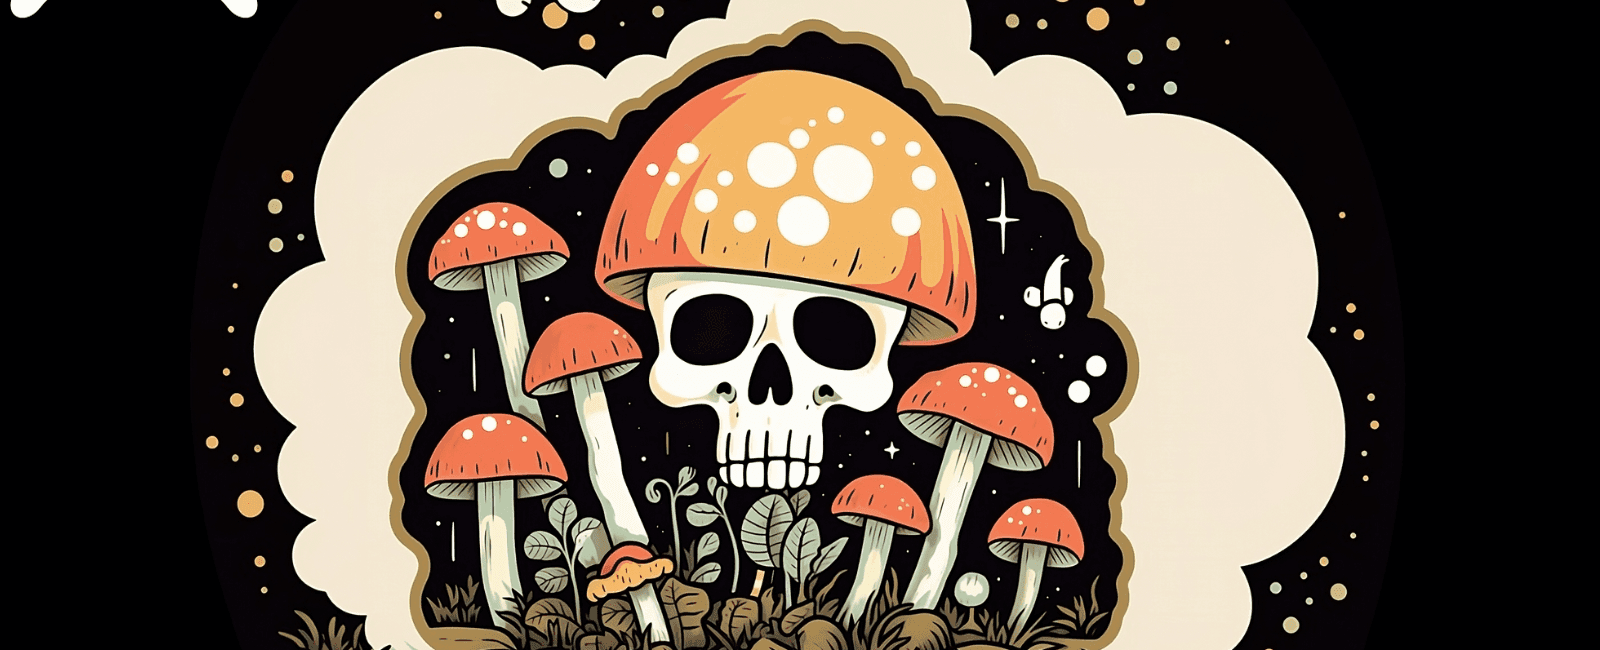 A Complete Guide to Identifying and Avoiding Toxic Mushrooms